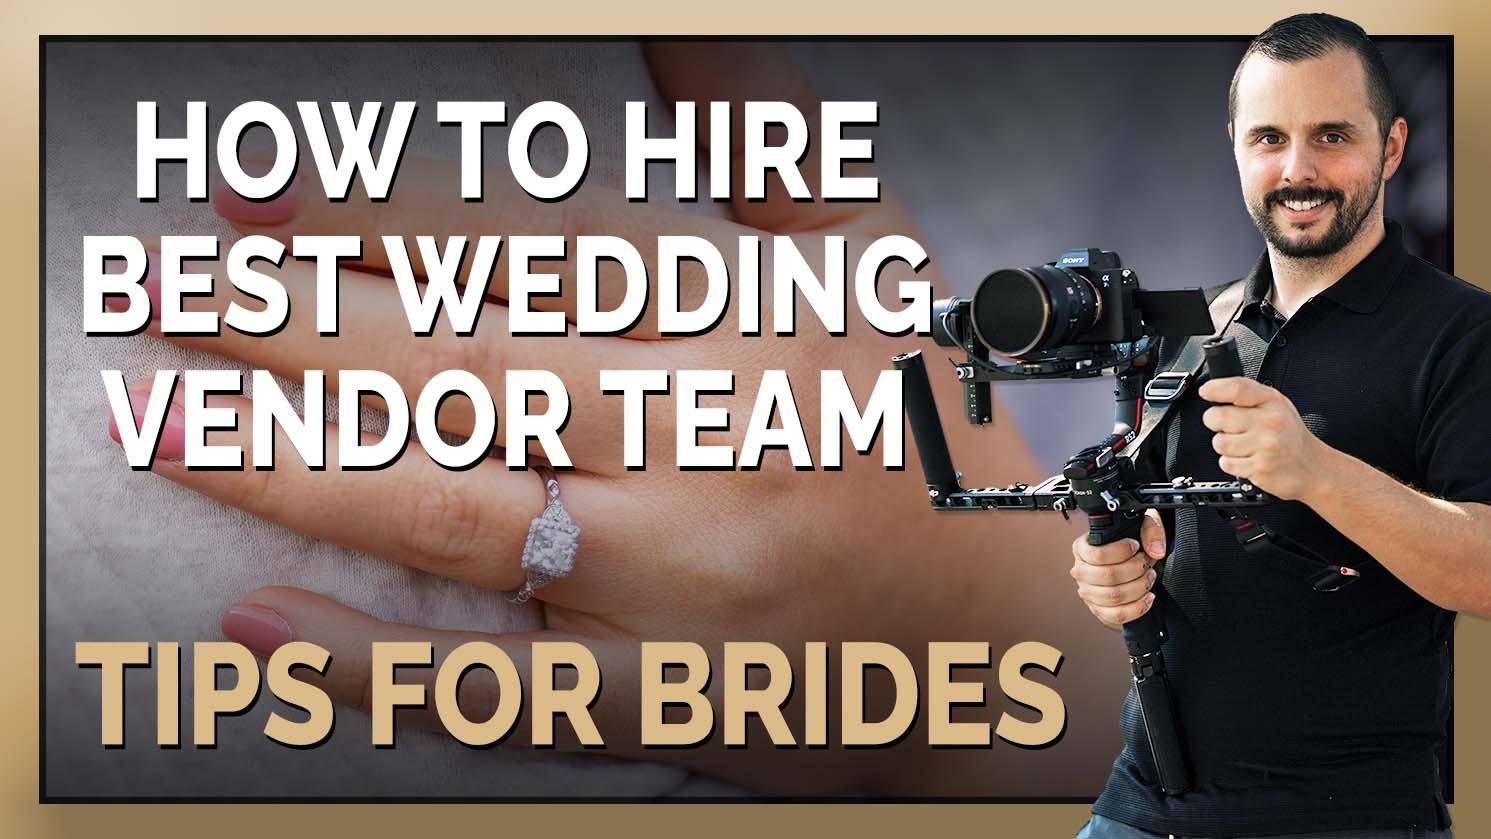 How To Hire The Best Wedding Vendor Team